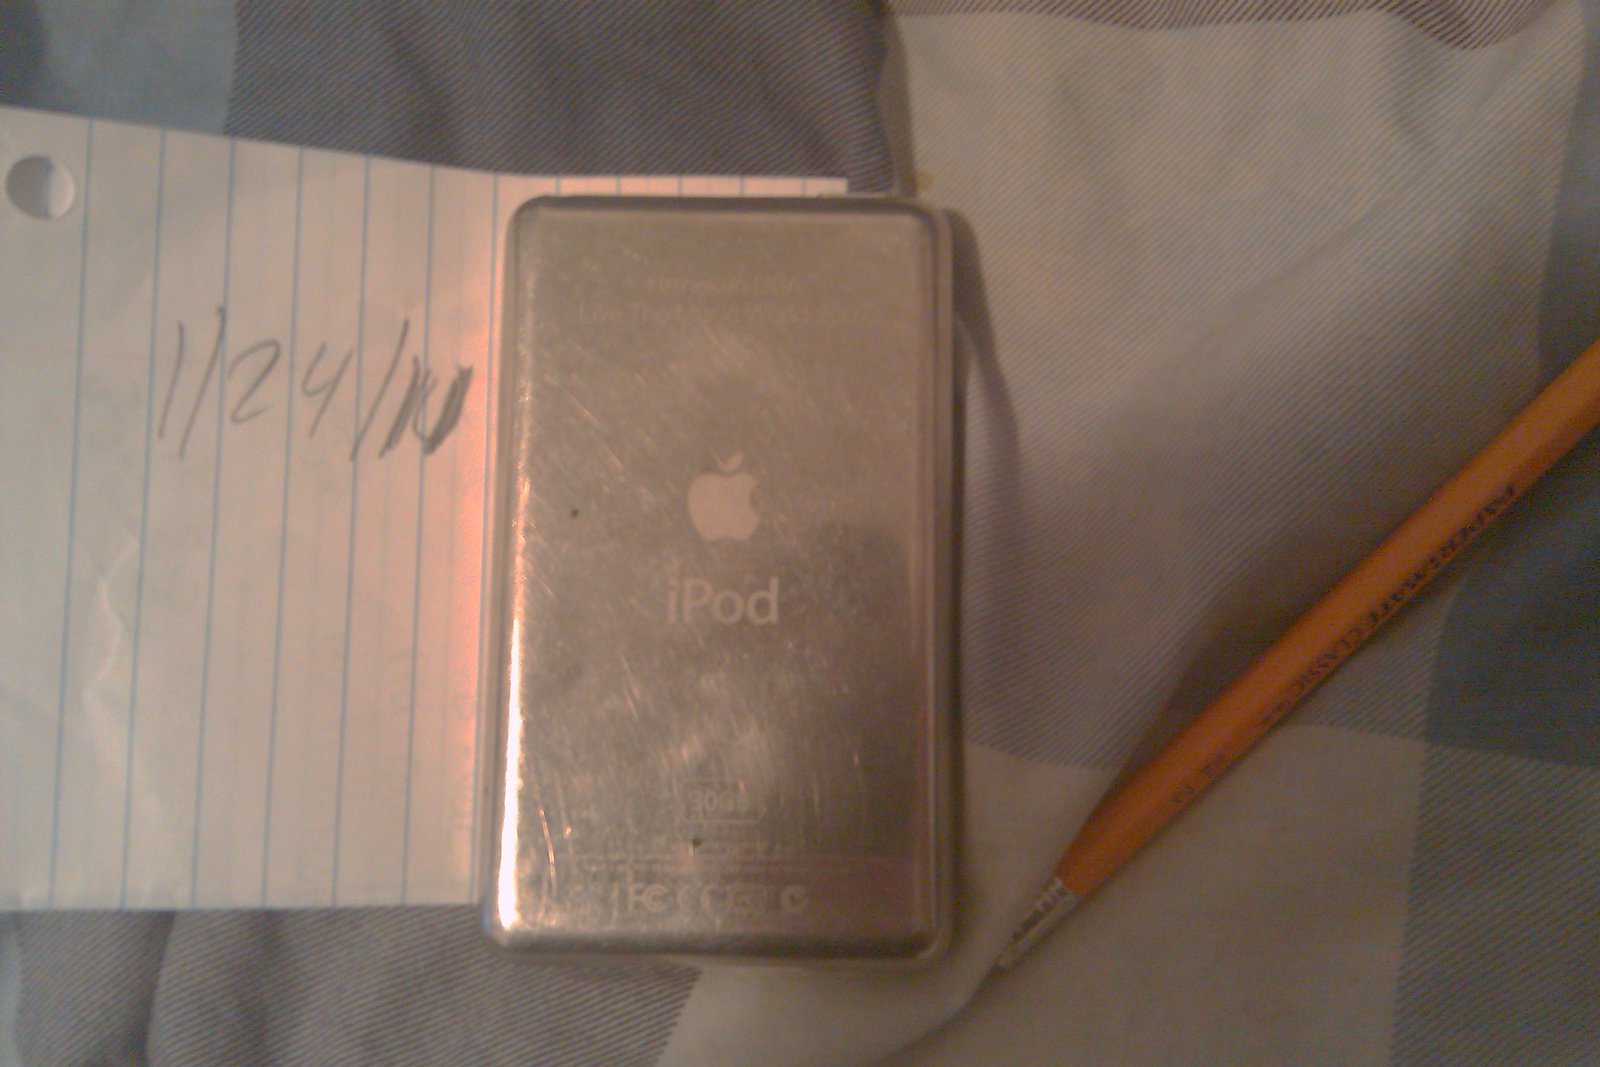 Back of ipod video